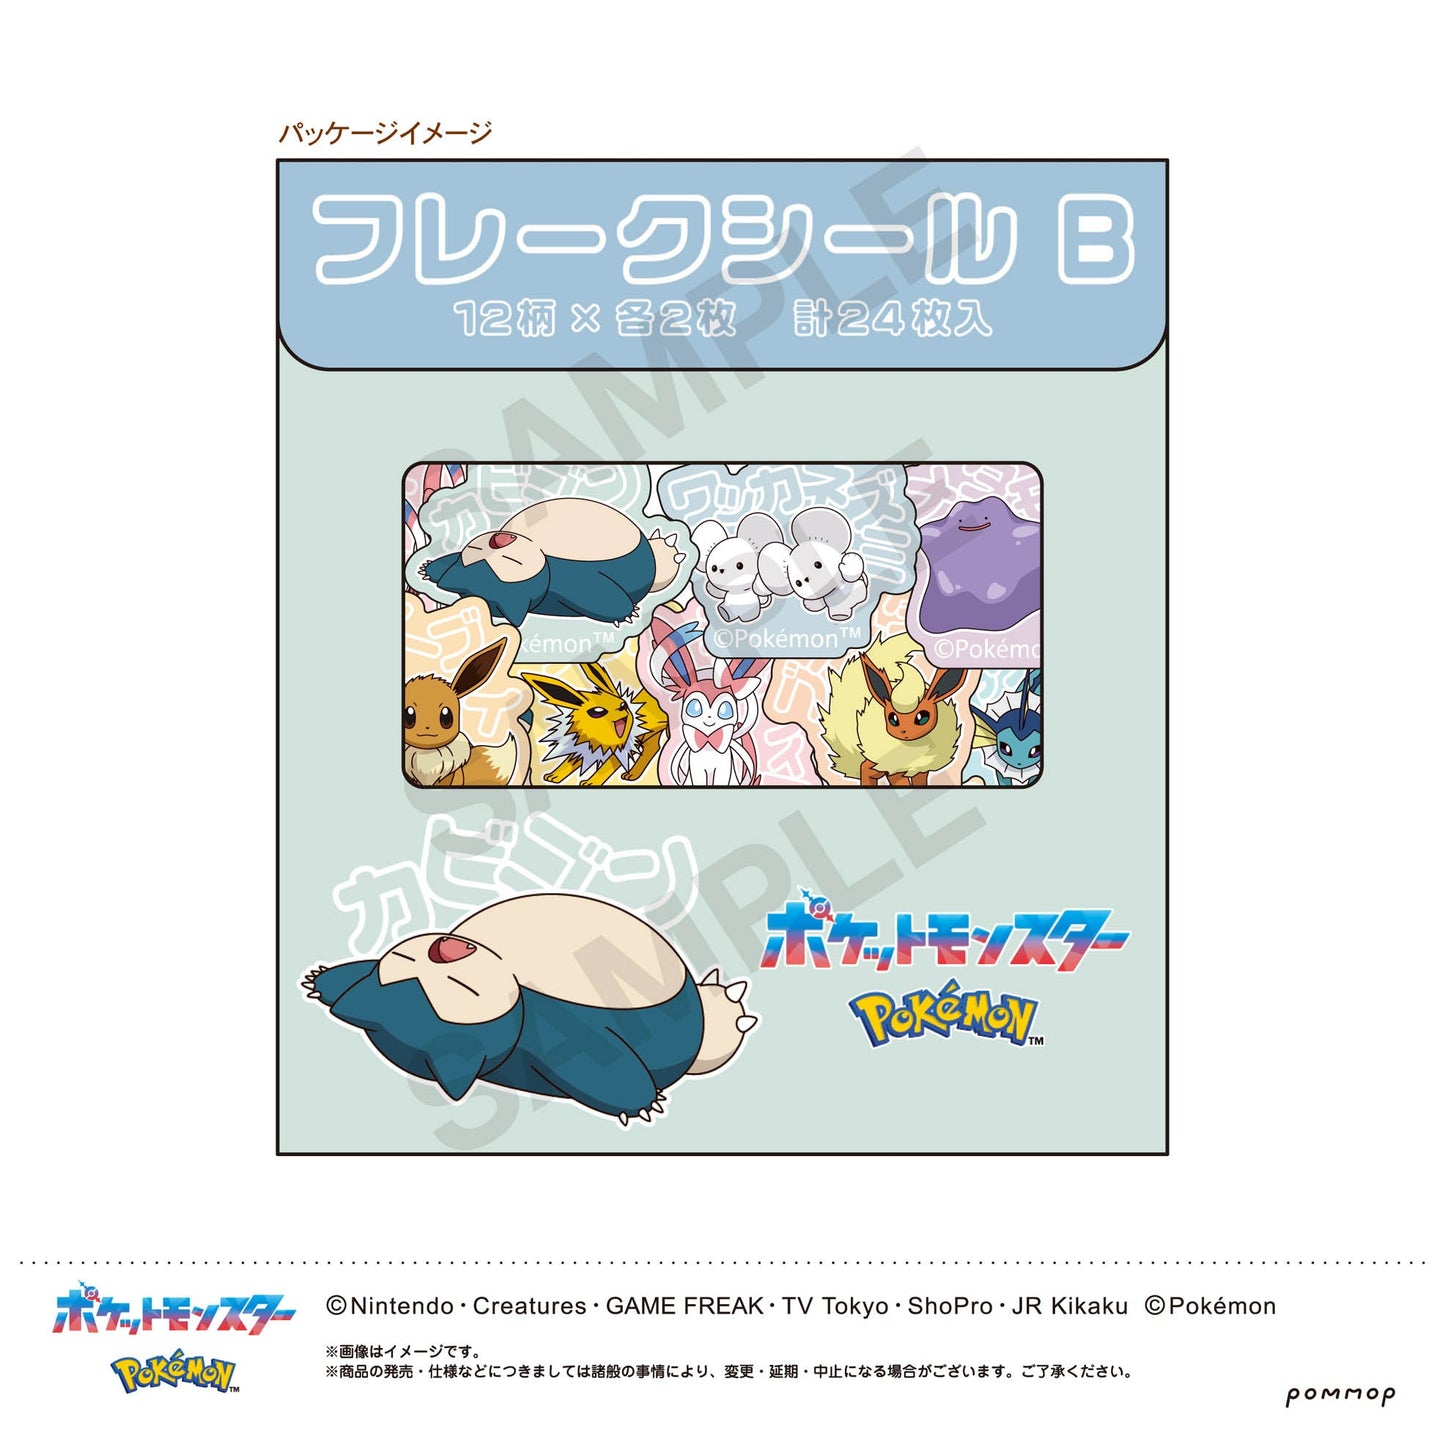 Showa Note - Pokemon: Flake Seal (B Normal type & Eevee evolved form) - Good Game Anime